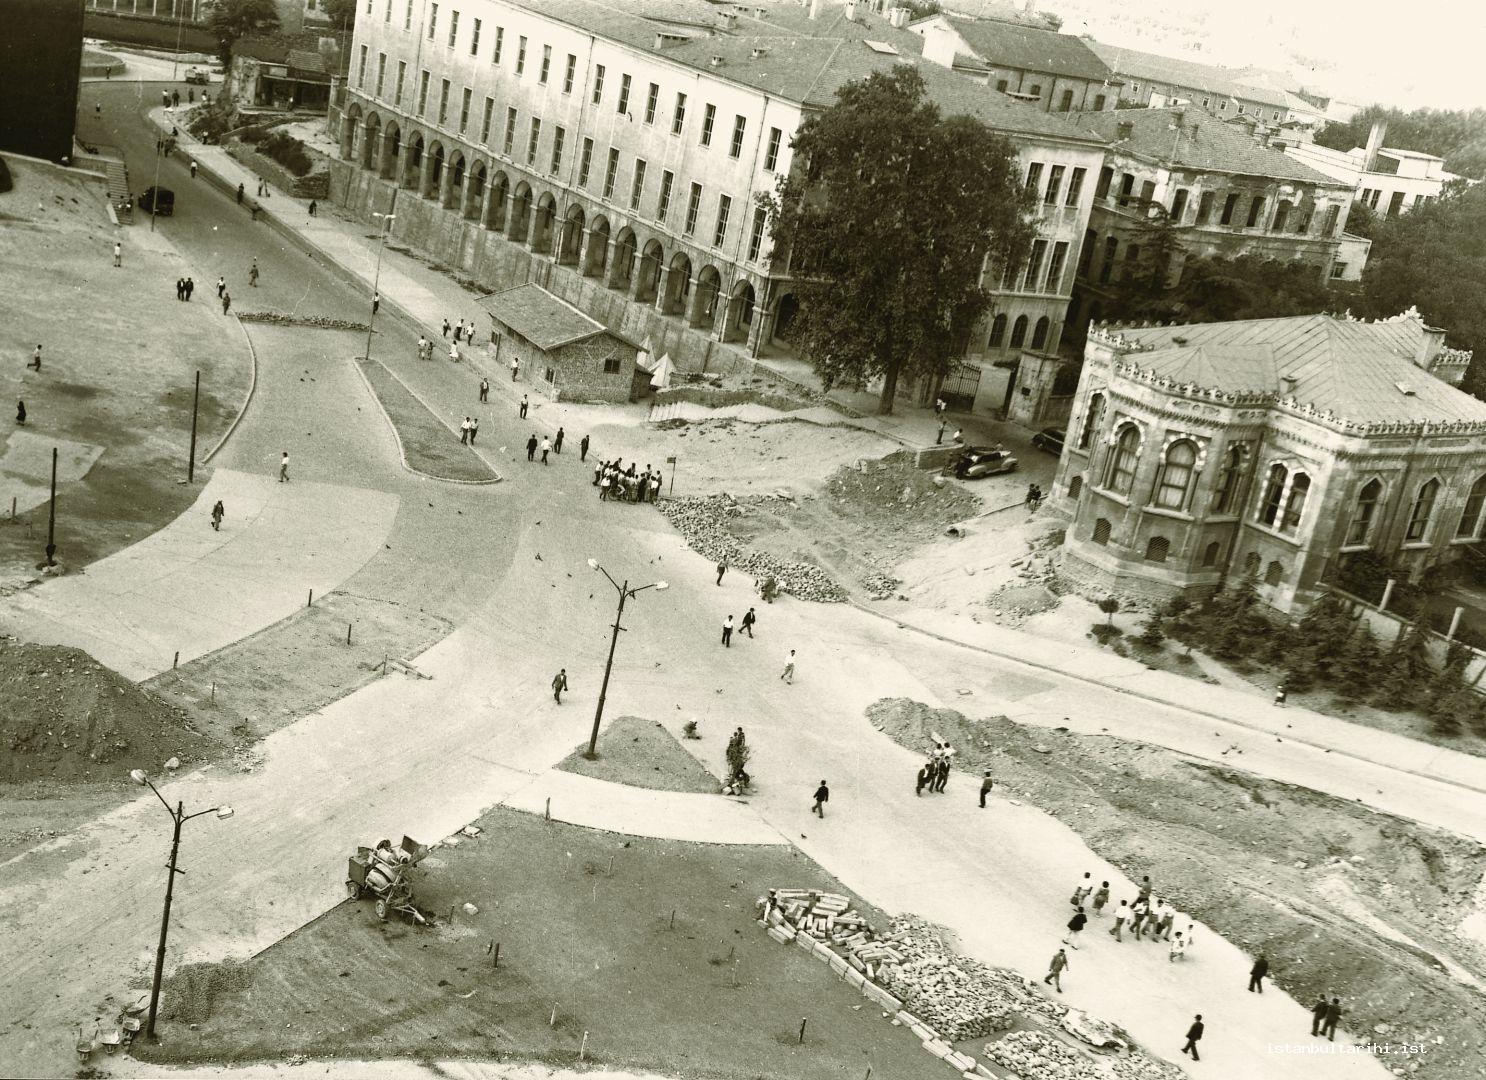 9- Beyazıt Square before Turgut Cansever’s pedestrianization project began. The building on the left was Keçecizade Fuad Paşa Mansion which is currently used as the   building of Faculty of Pharmacy